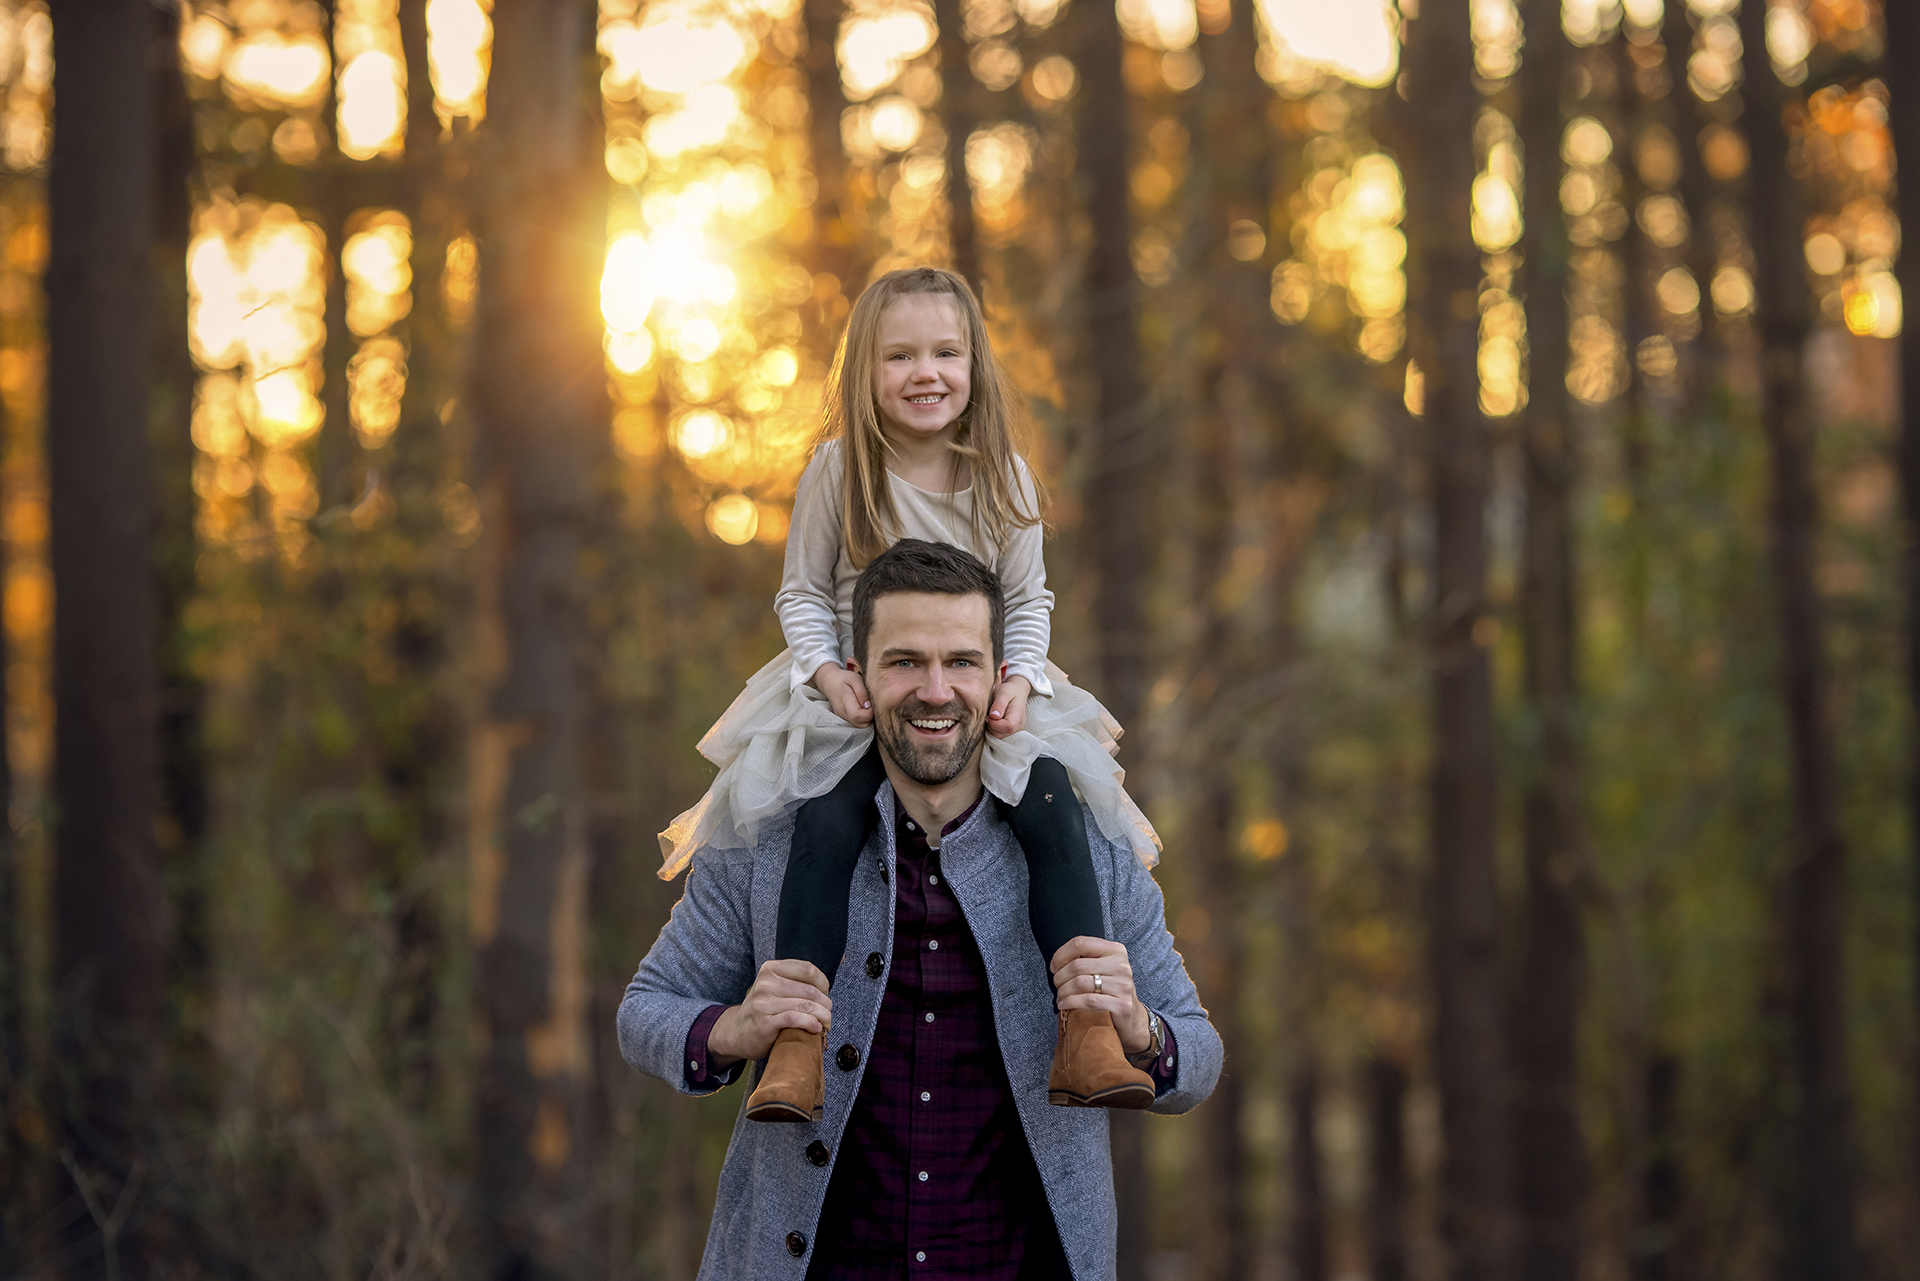 Detroit family photoshoot of a daughter sitting on her father's shoulders while smiling at the camera in the forest